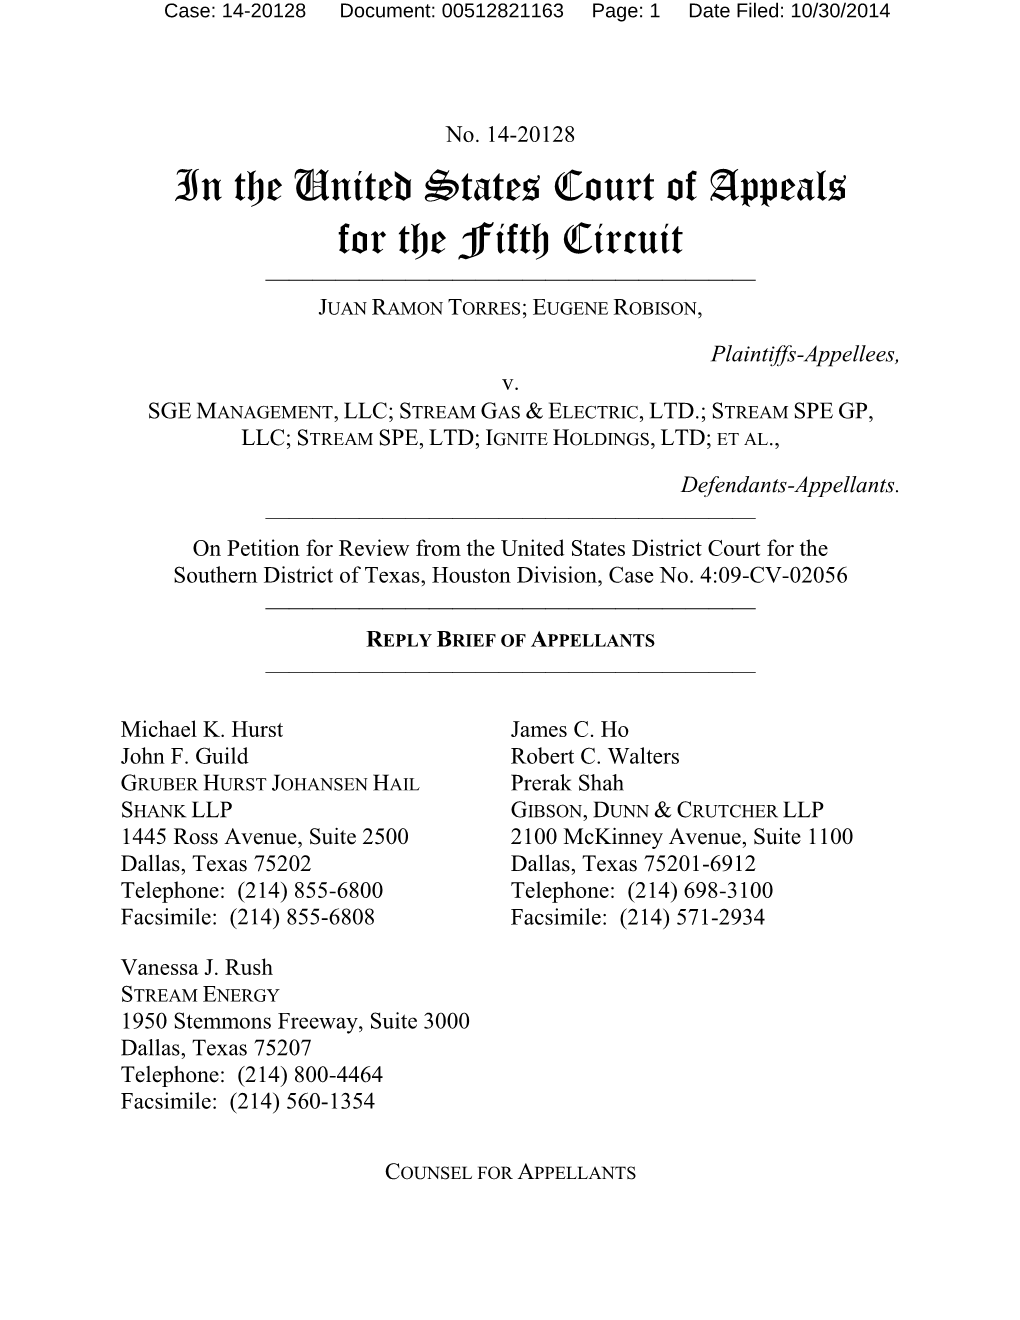 In the United States Court of Appeals for the Fifth Circuit ————————————————————— JUAN RAMON TORRES; EUGENE ROBISON